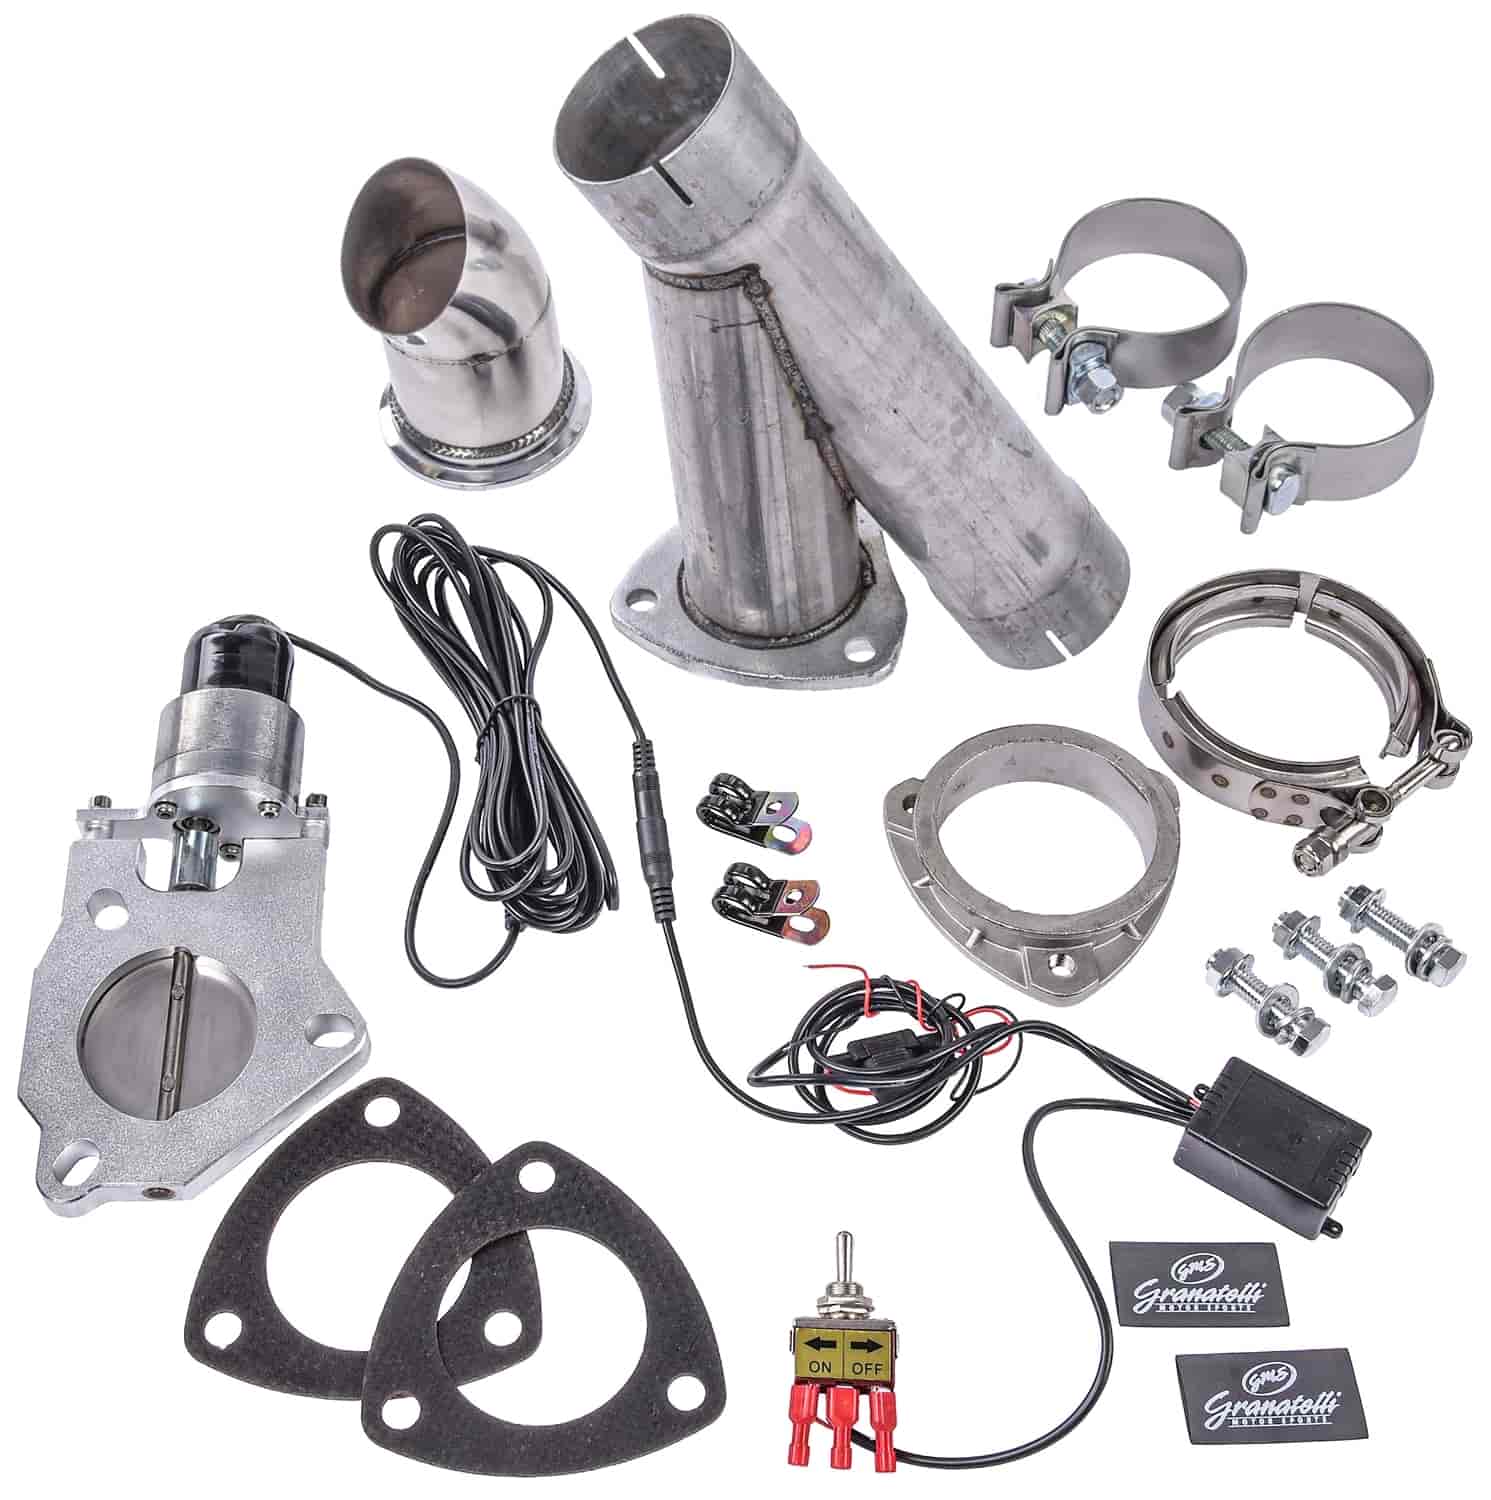 Electronic Aluminized Mild Steel Exhaust Cutout System for 3 in. Single Exhaust (Slip-Fit)